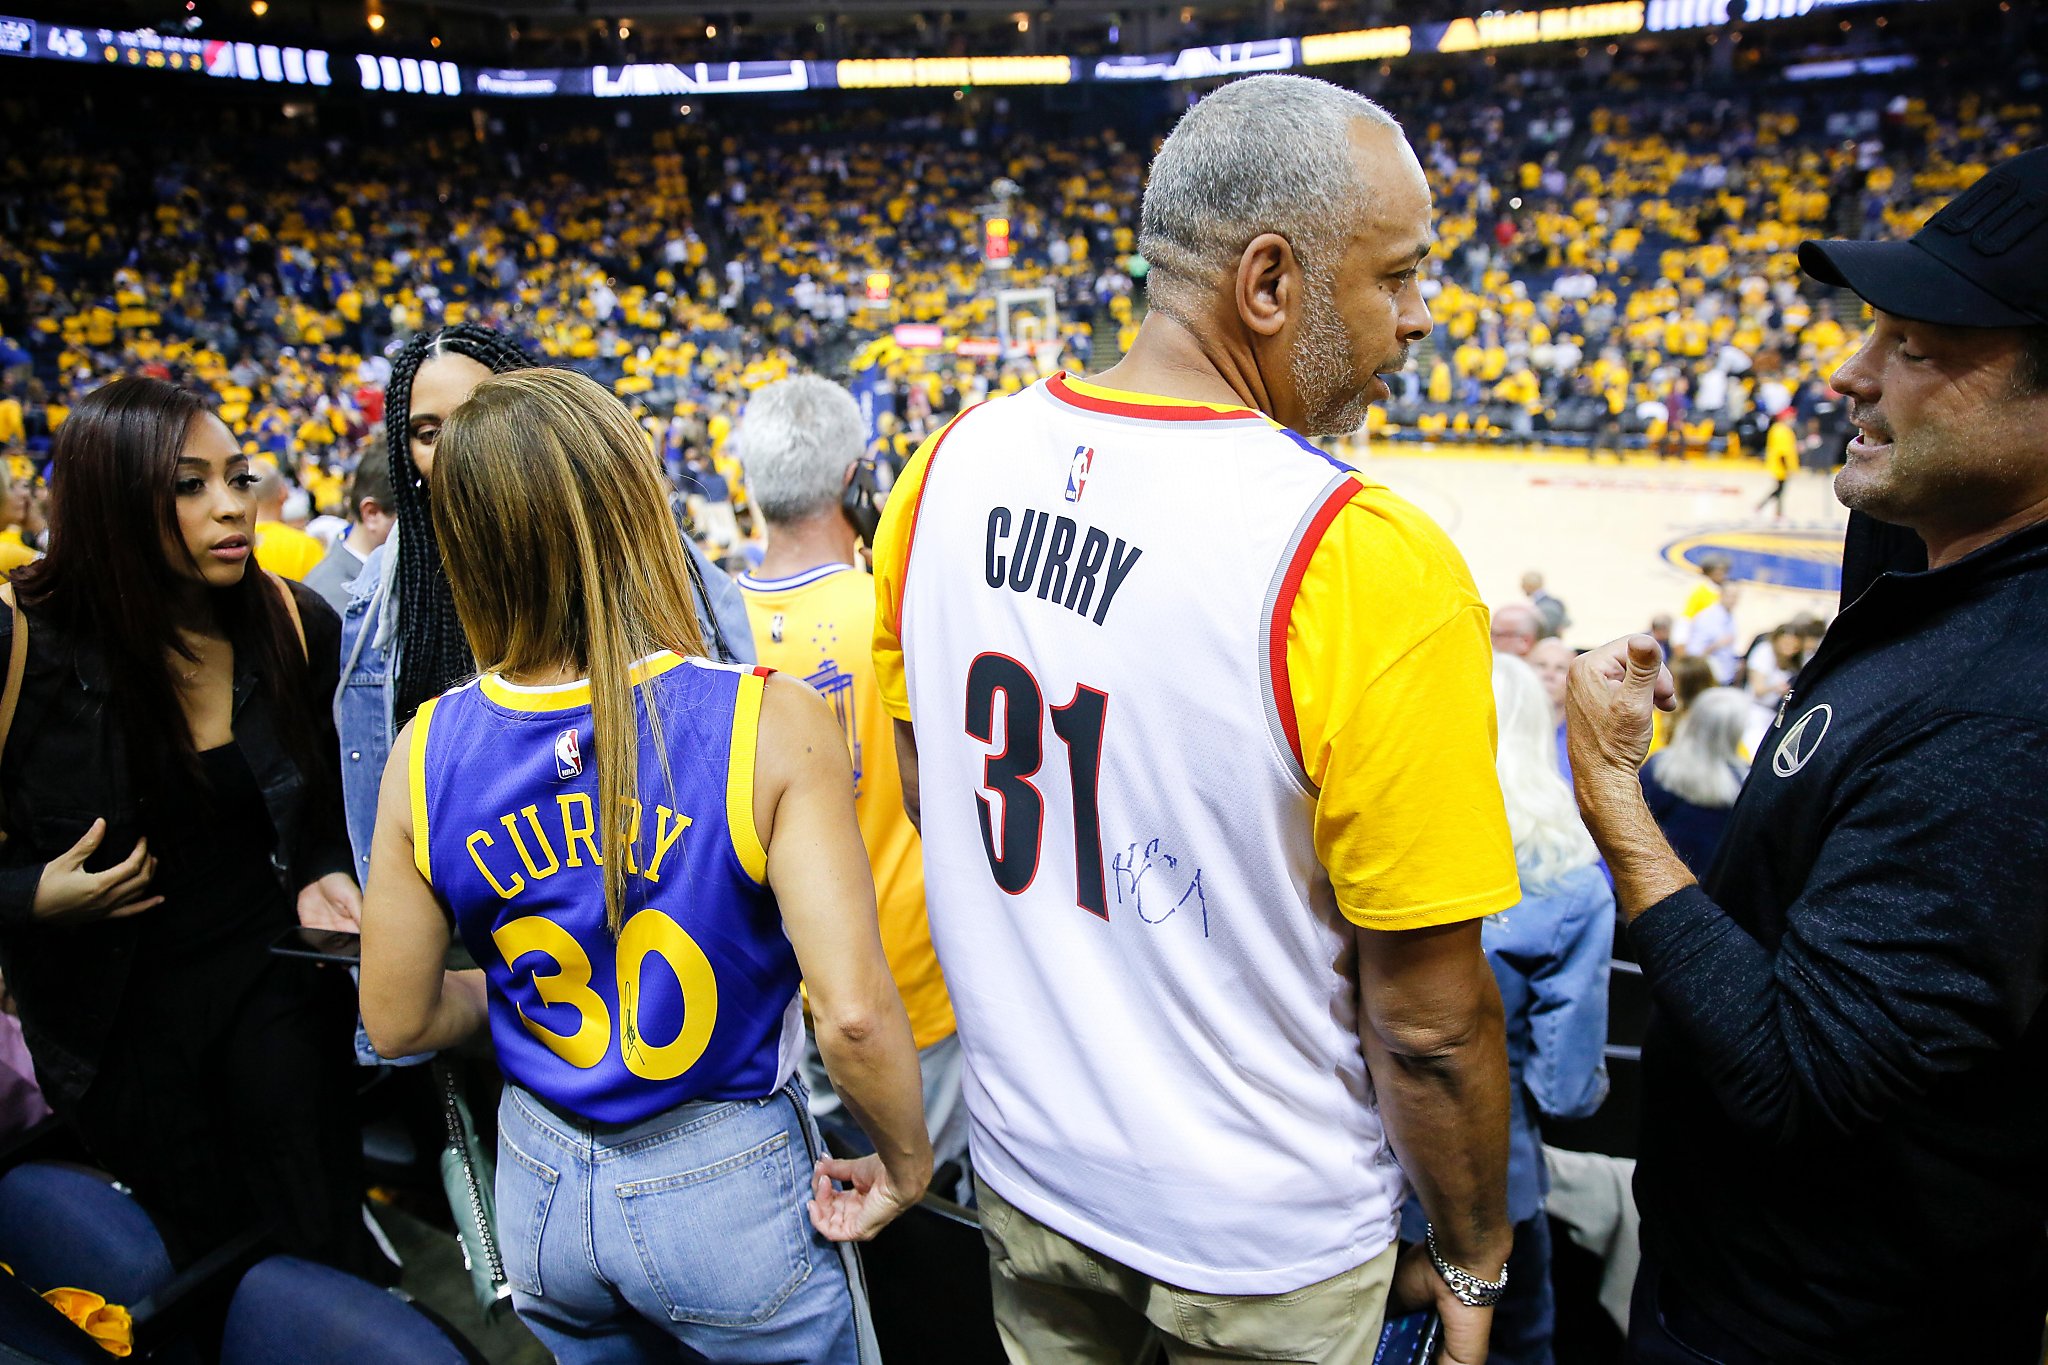 Dell Curry's Jersey For Tonight's Game Going Viral - The Spun